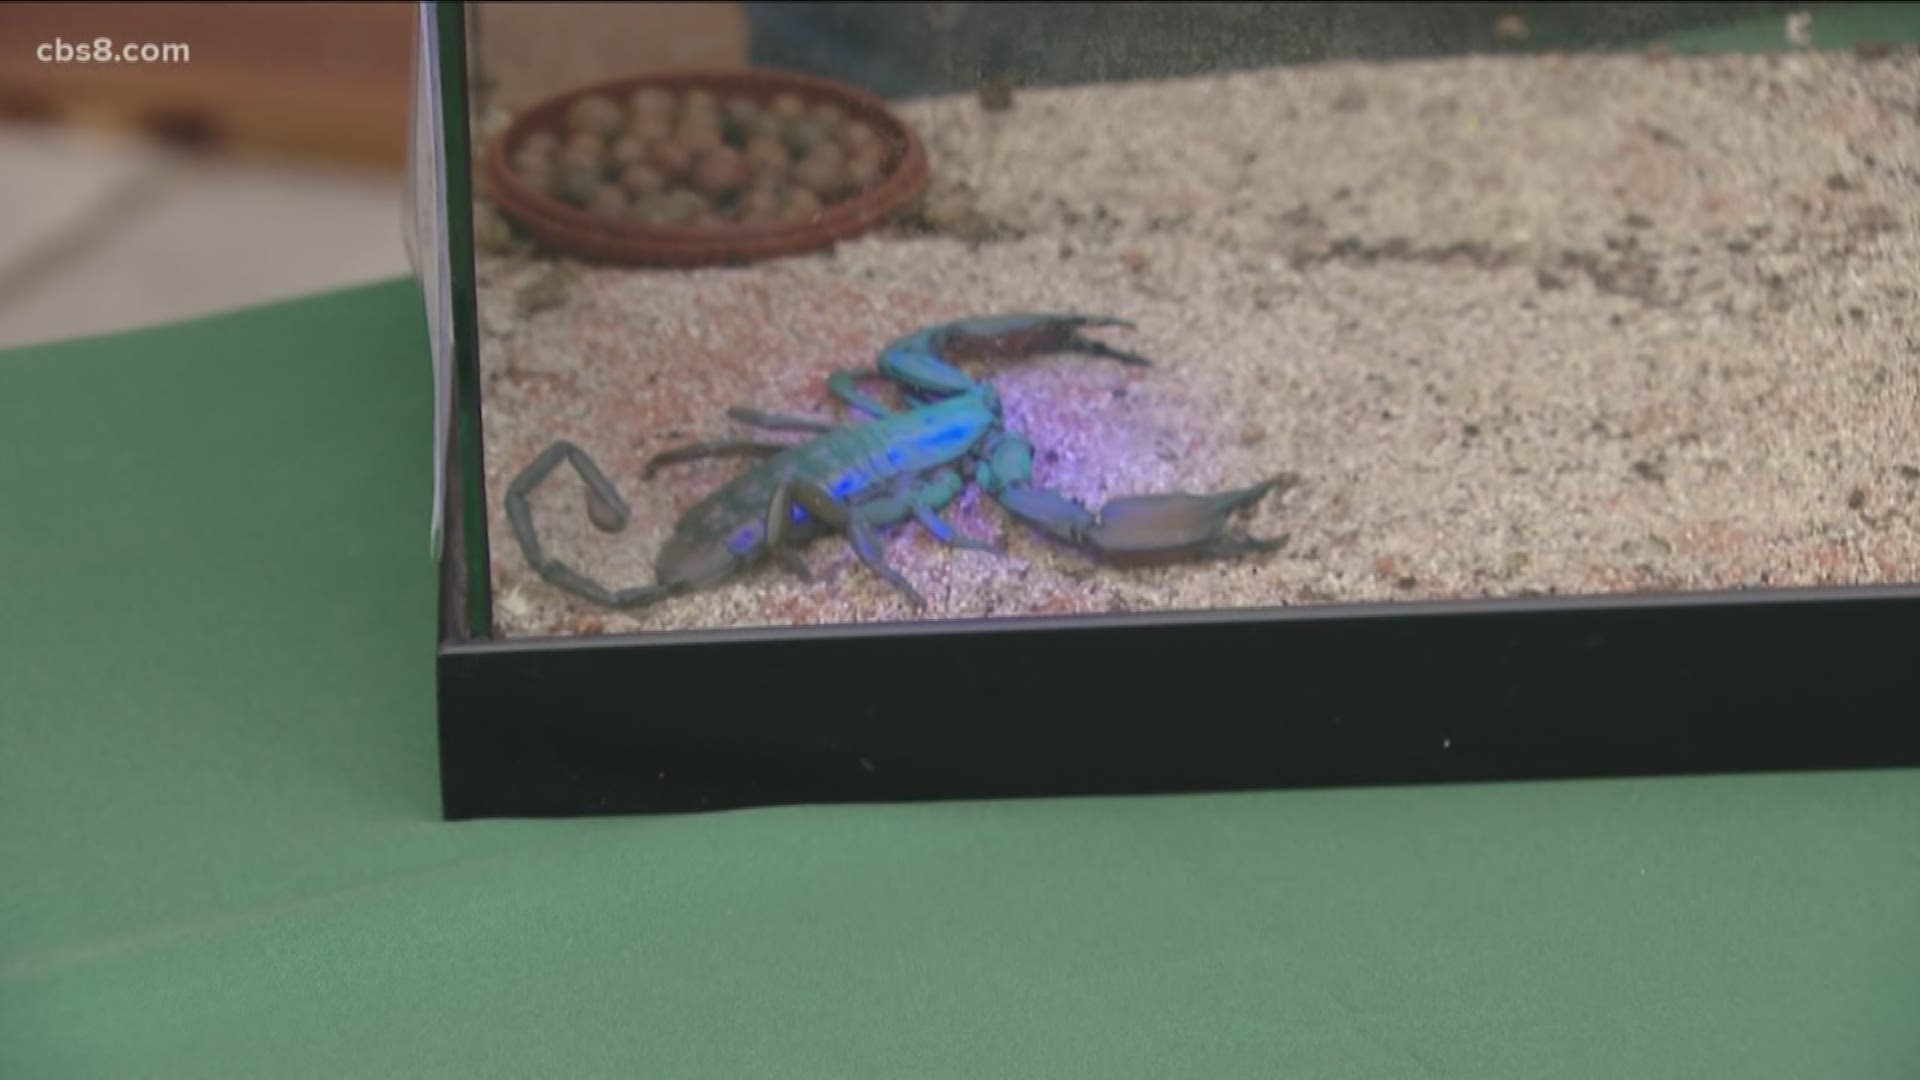 The Insect Festival will feature live insects, spiders, lizards and snakes.